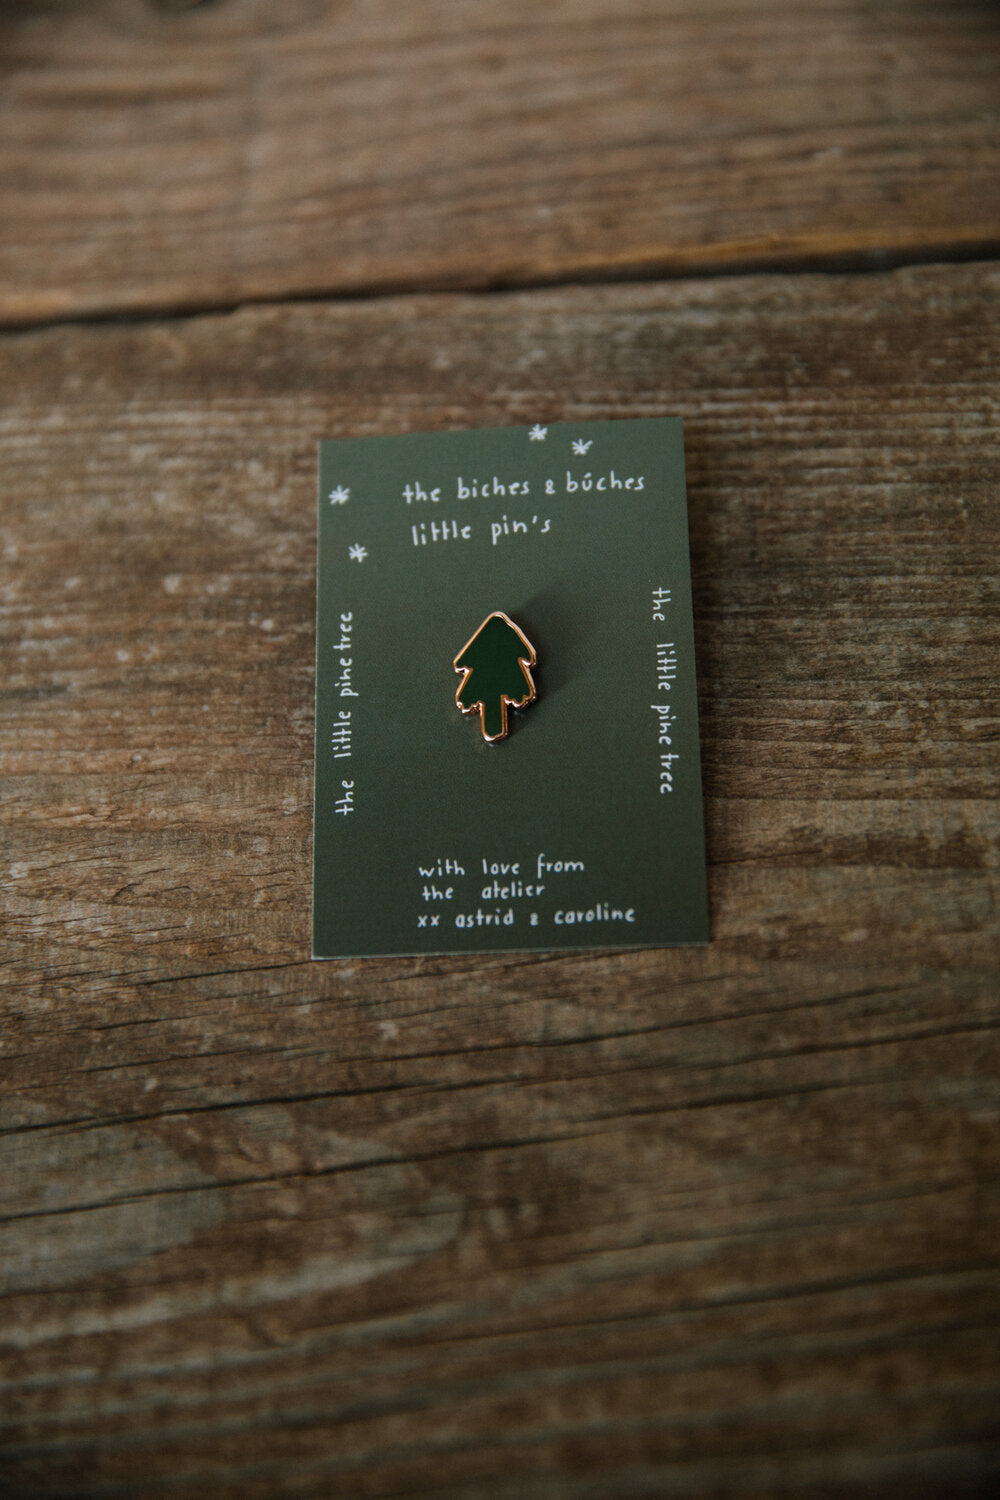 Biches & Buches - The Little Pine Tree Pin